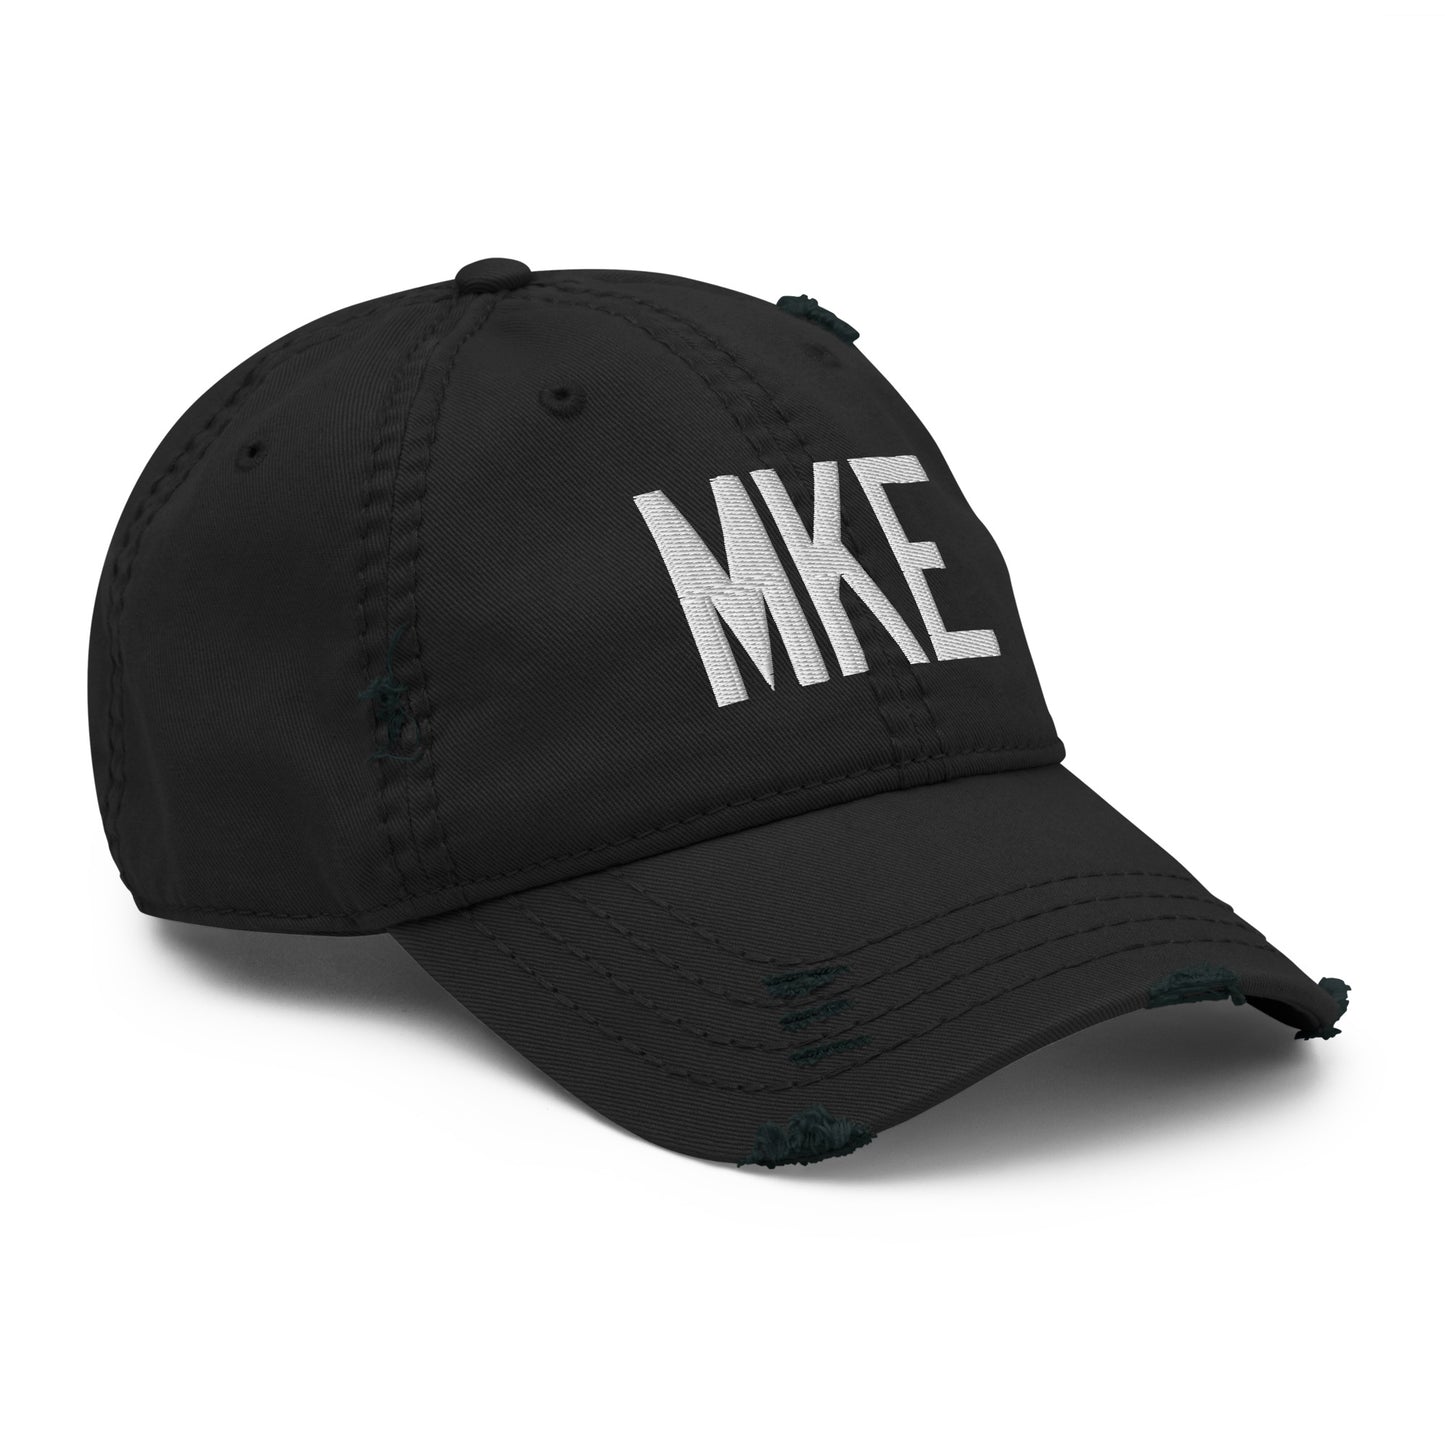 Airport Code Distressed Hat - White • MKE Milwaukee • YHM Designs - Image 12